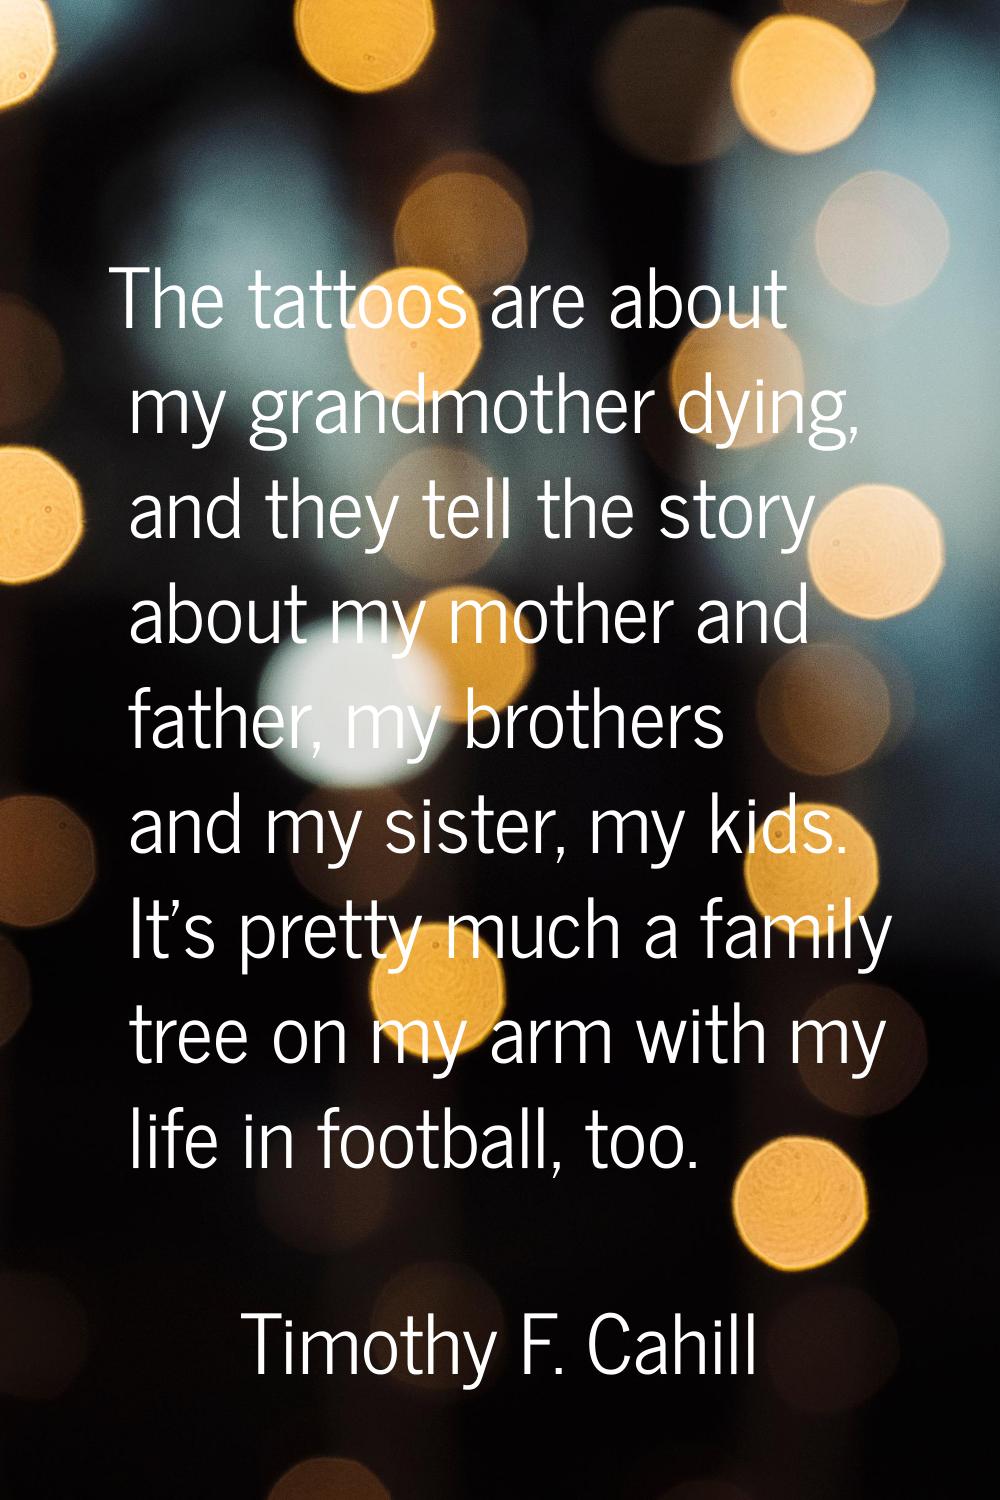 The tattoos are about my grandmother dying, and they tell the story about my mother and father, my 